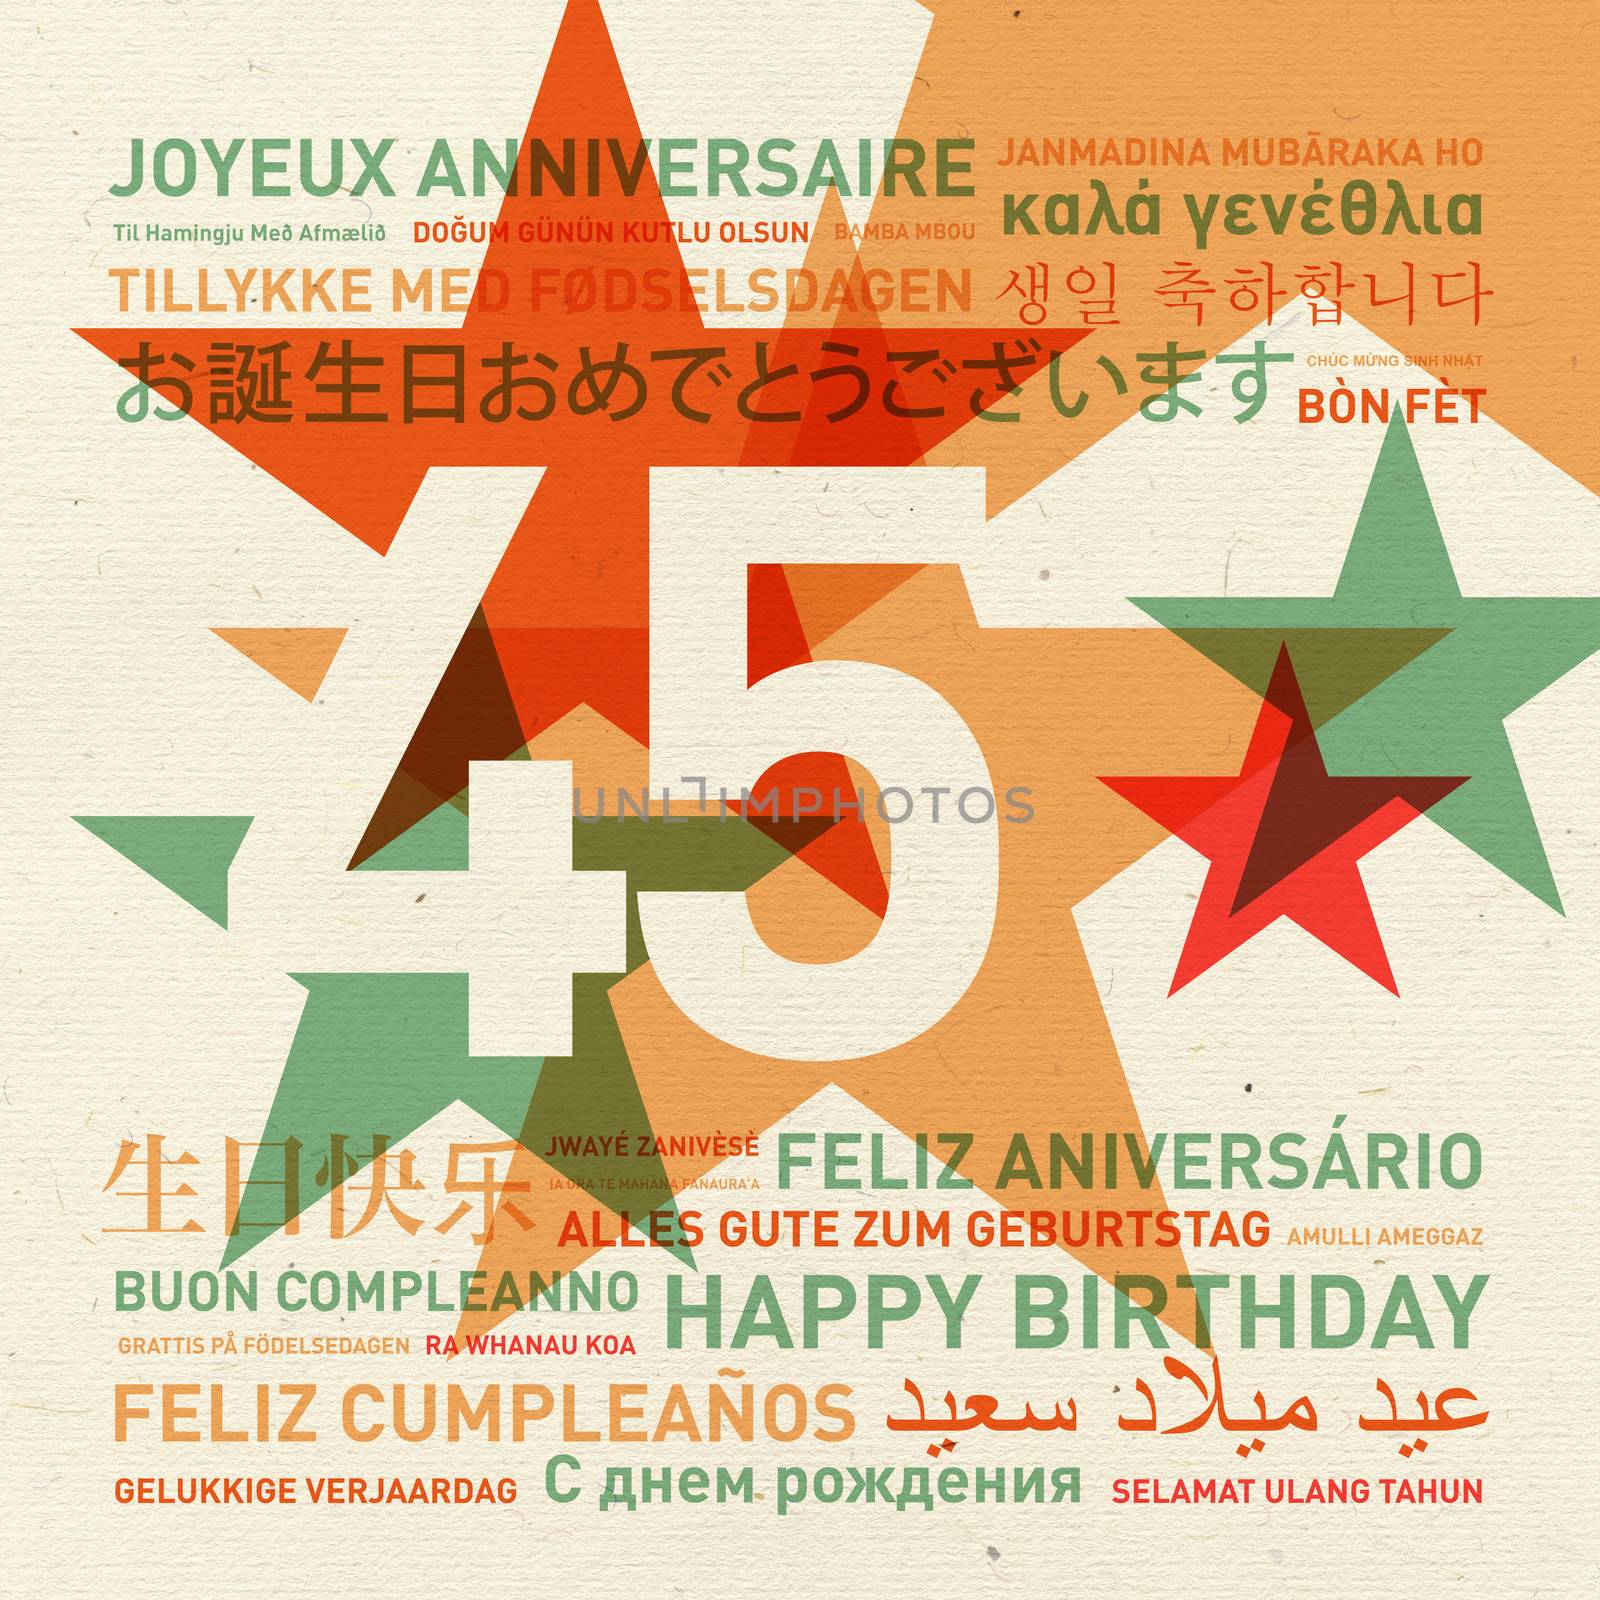 45th anniversary happy birthday from the world. Different languages celebration card